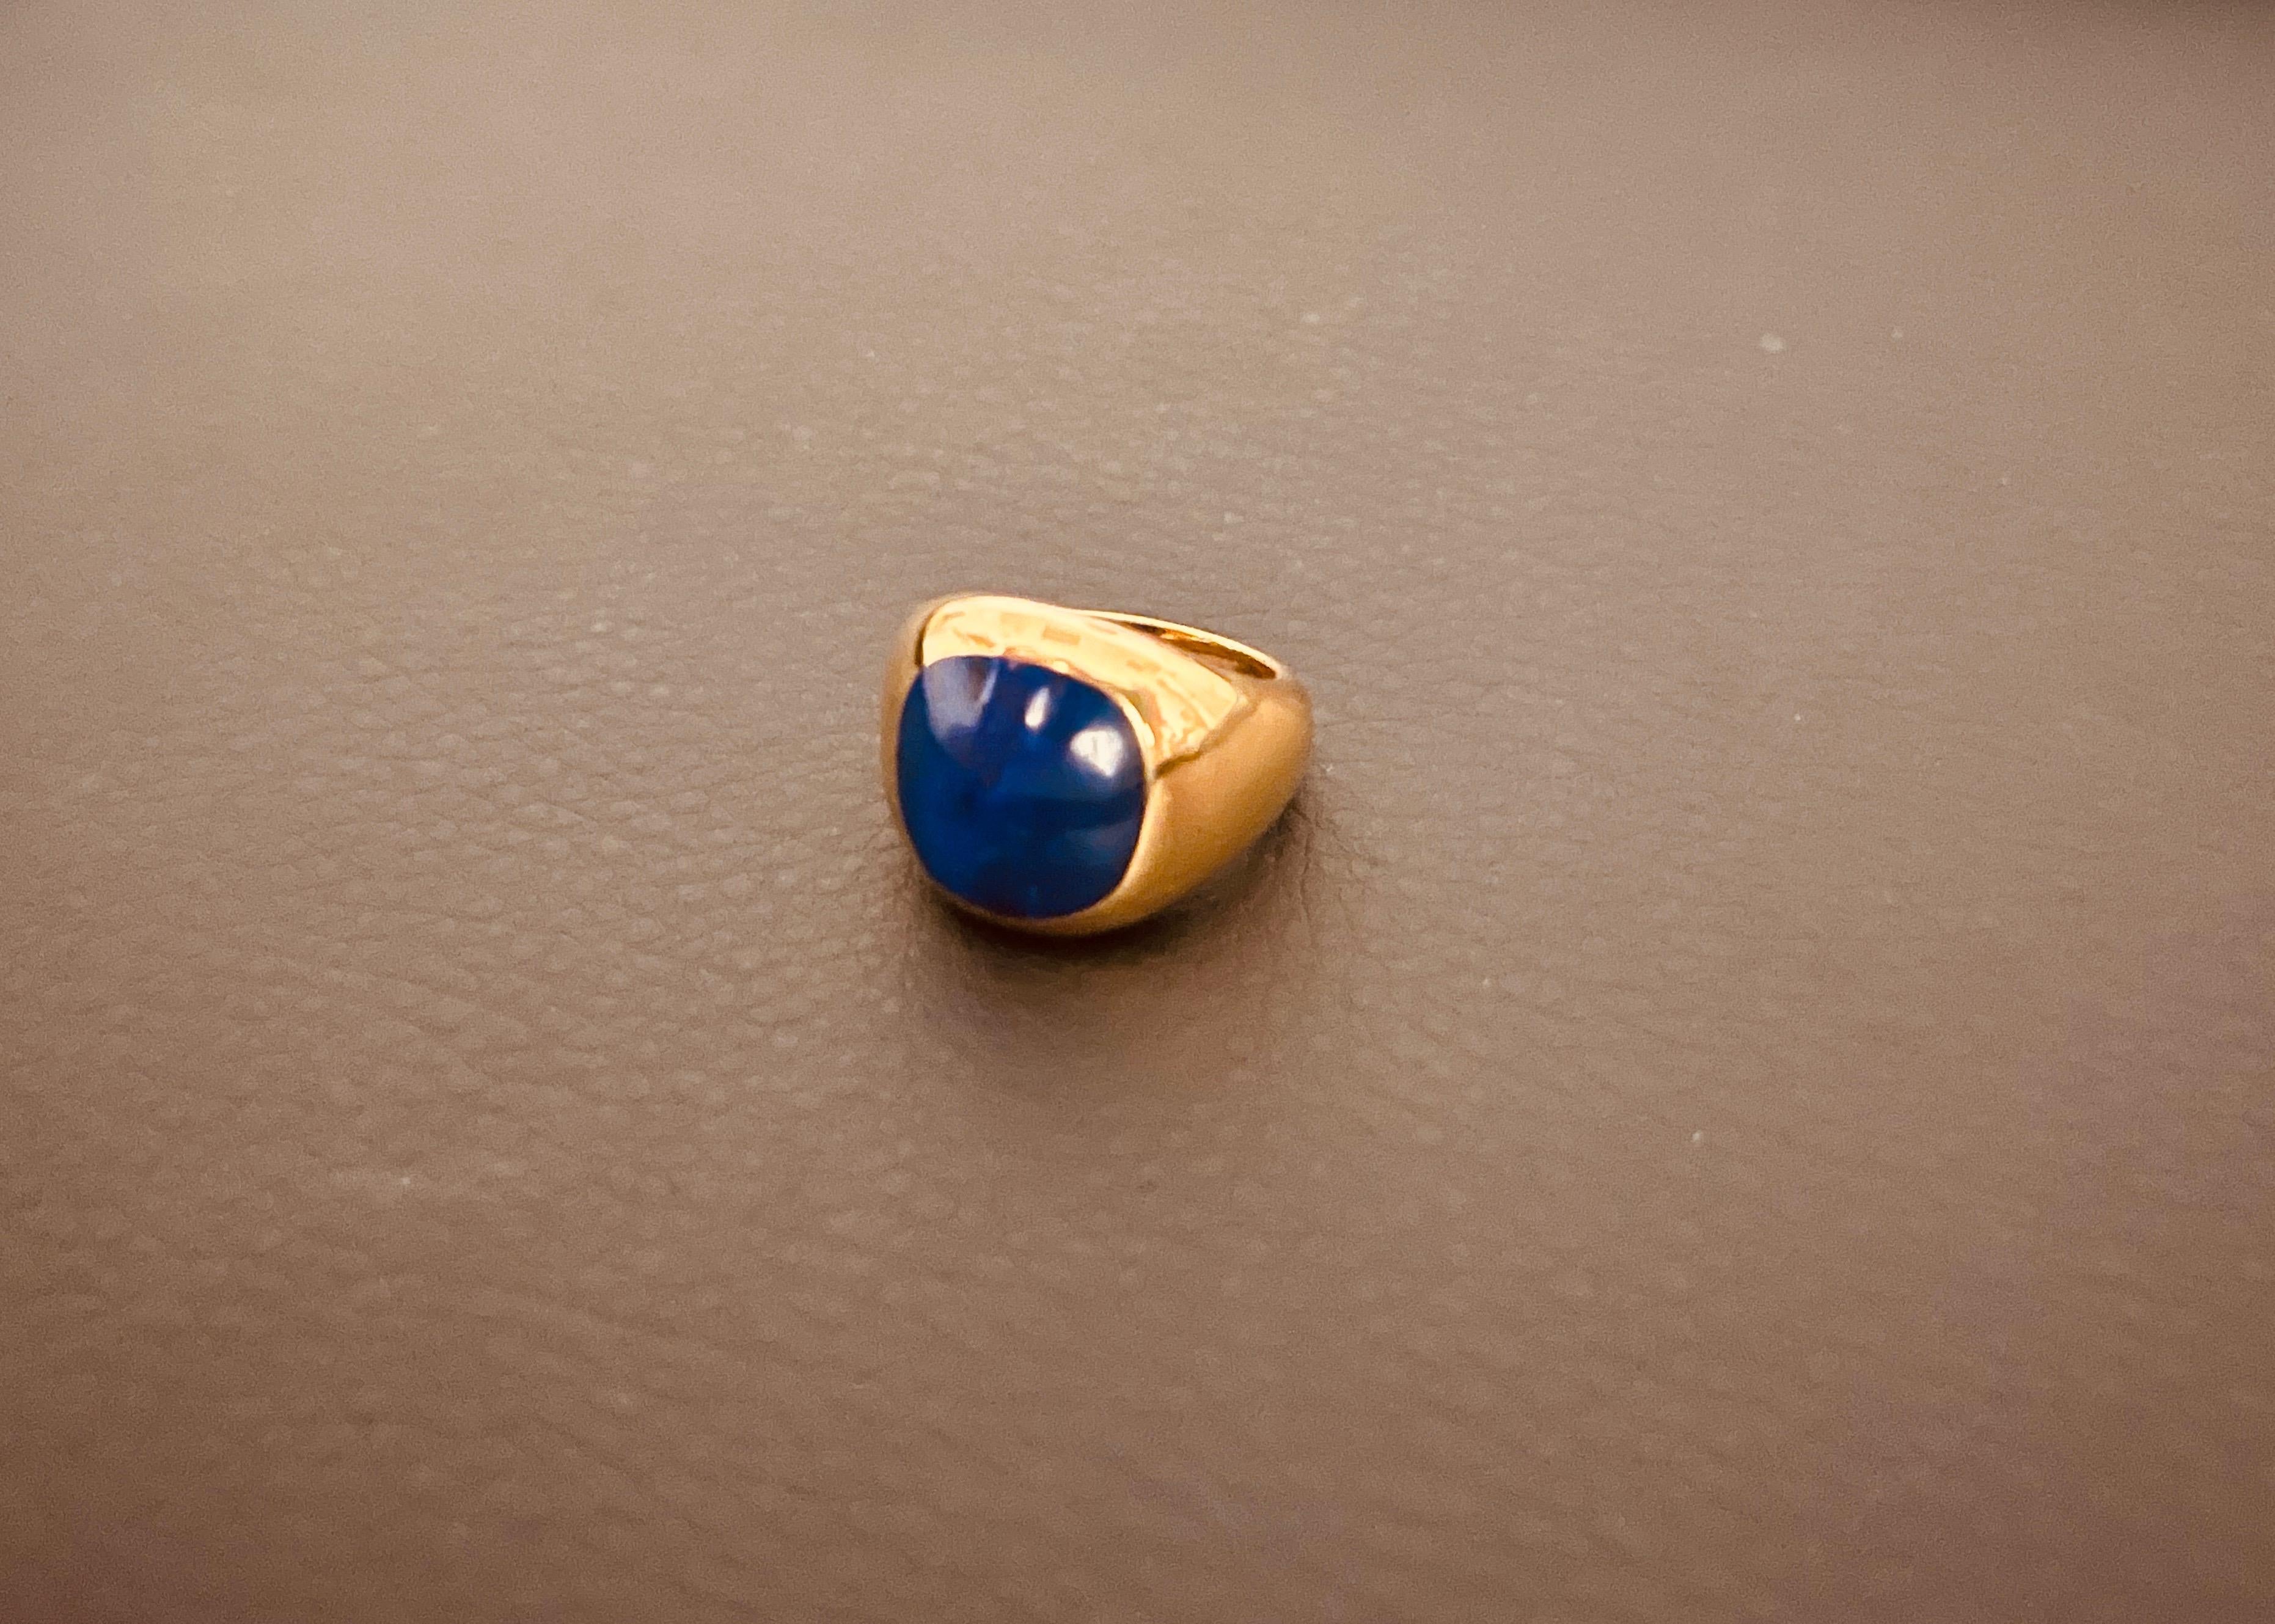 A Cushion Shaped Lapis Lazuli Mounted In a 18 Carat Yellow Gold Signet Ring  For Sale 5